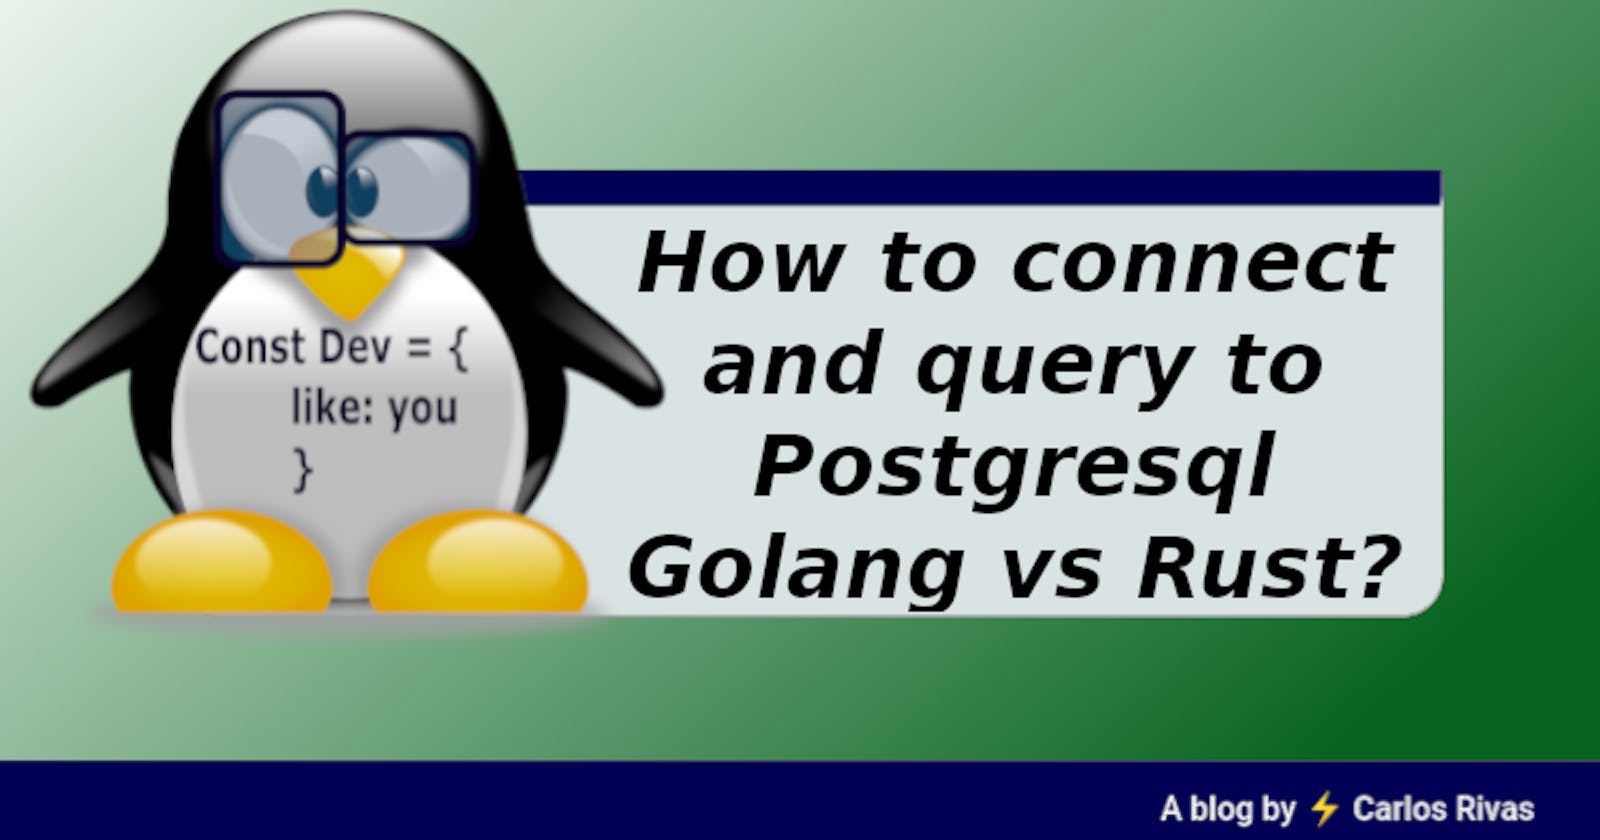 How to connect and query to Postgresql Golang vs Rust?